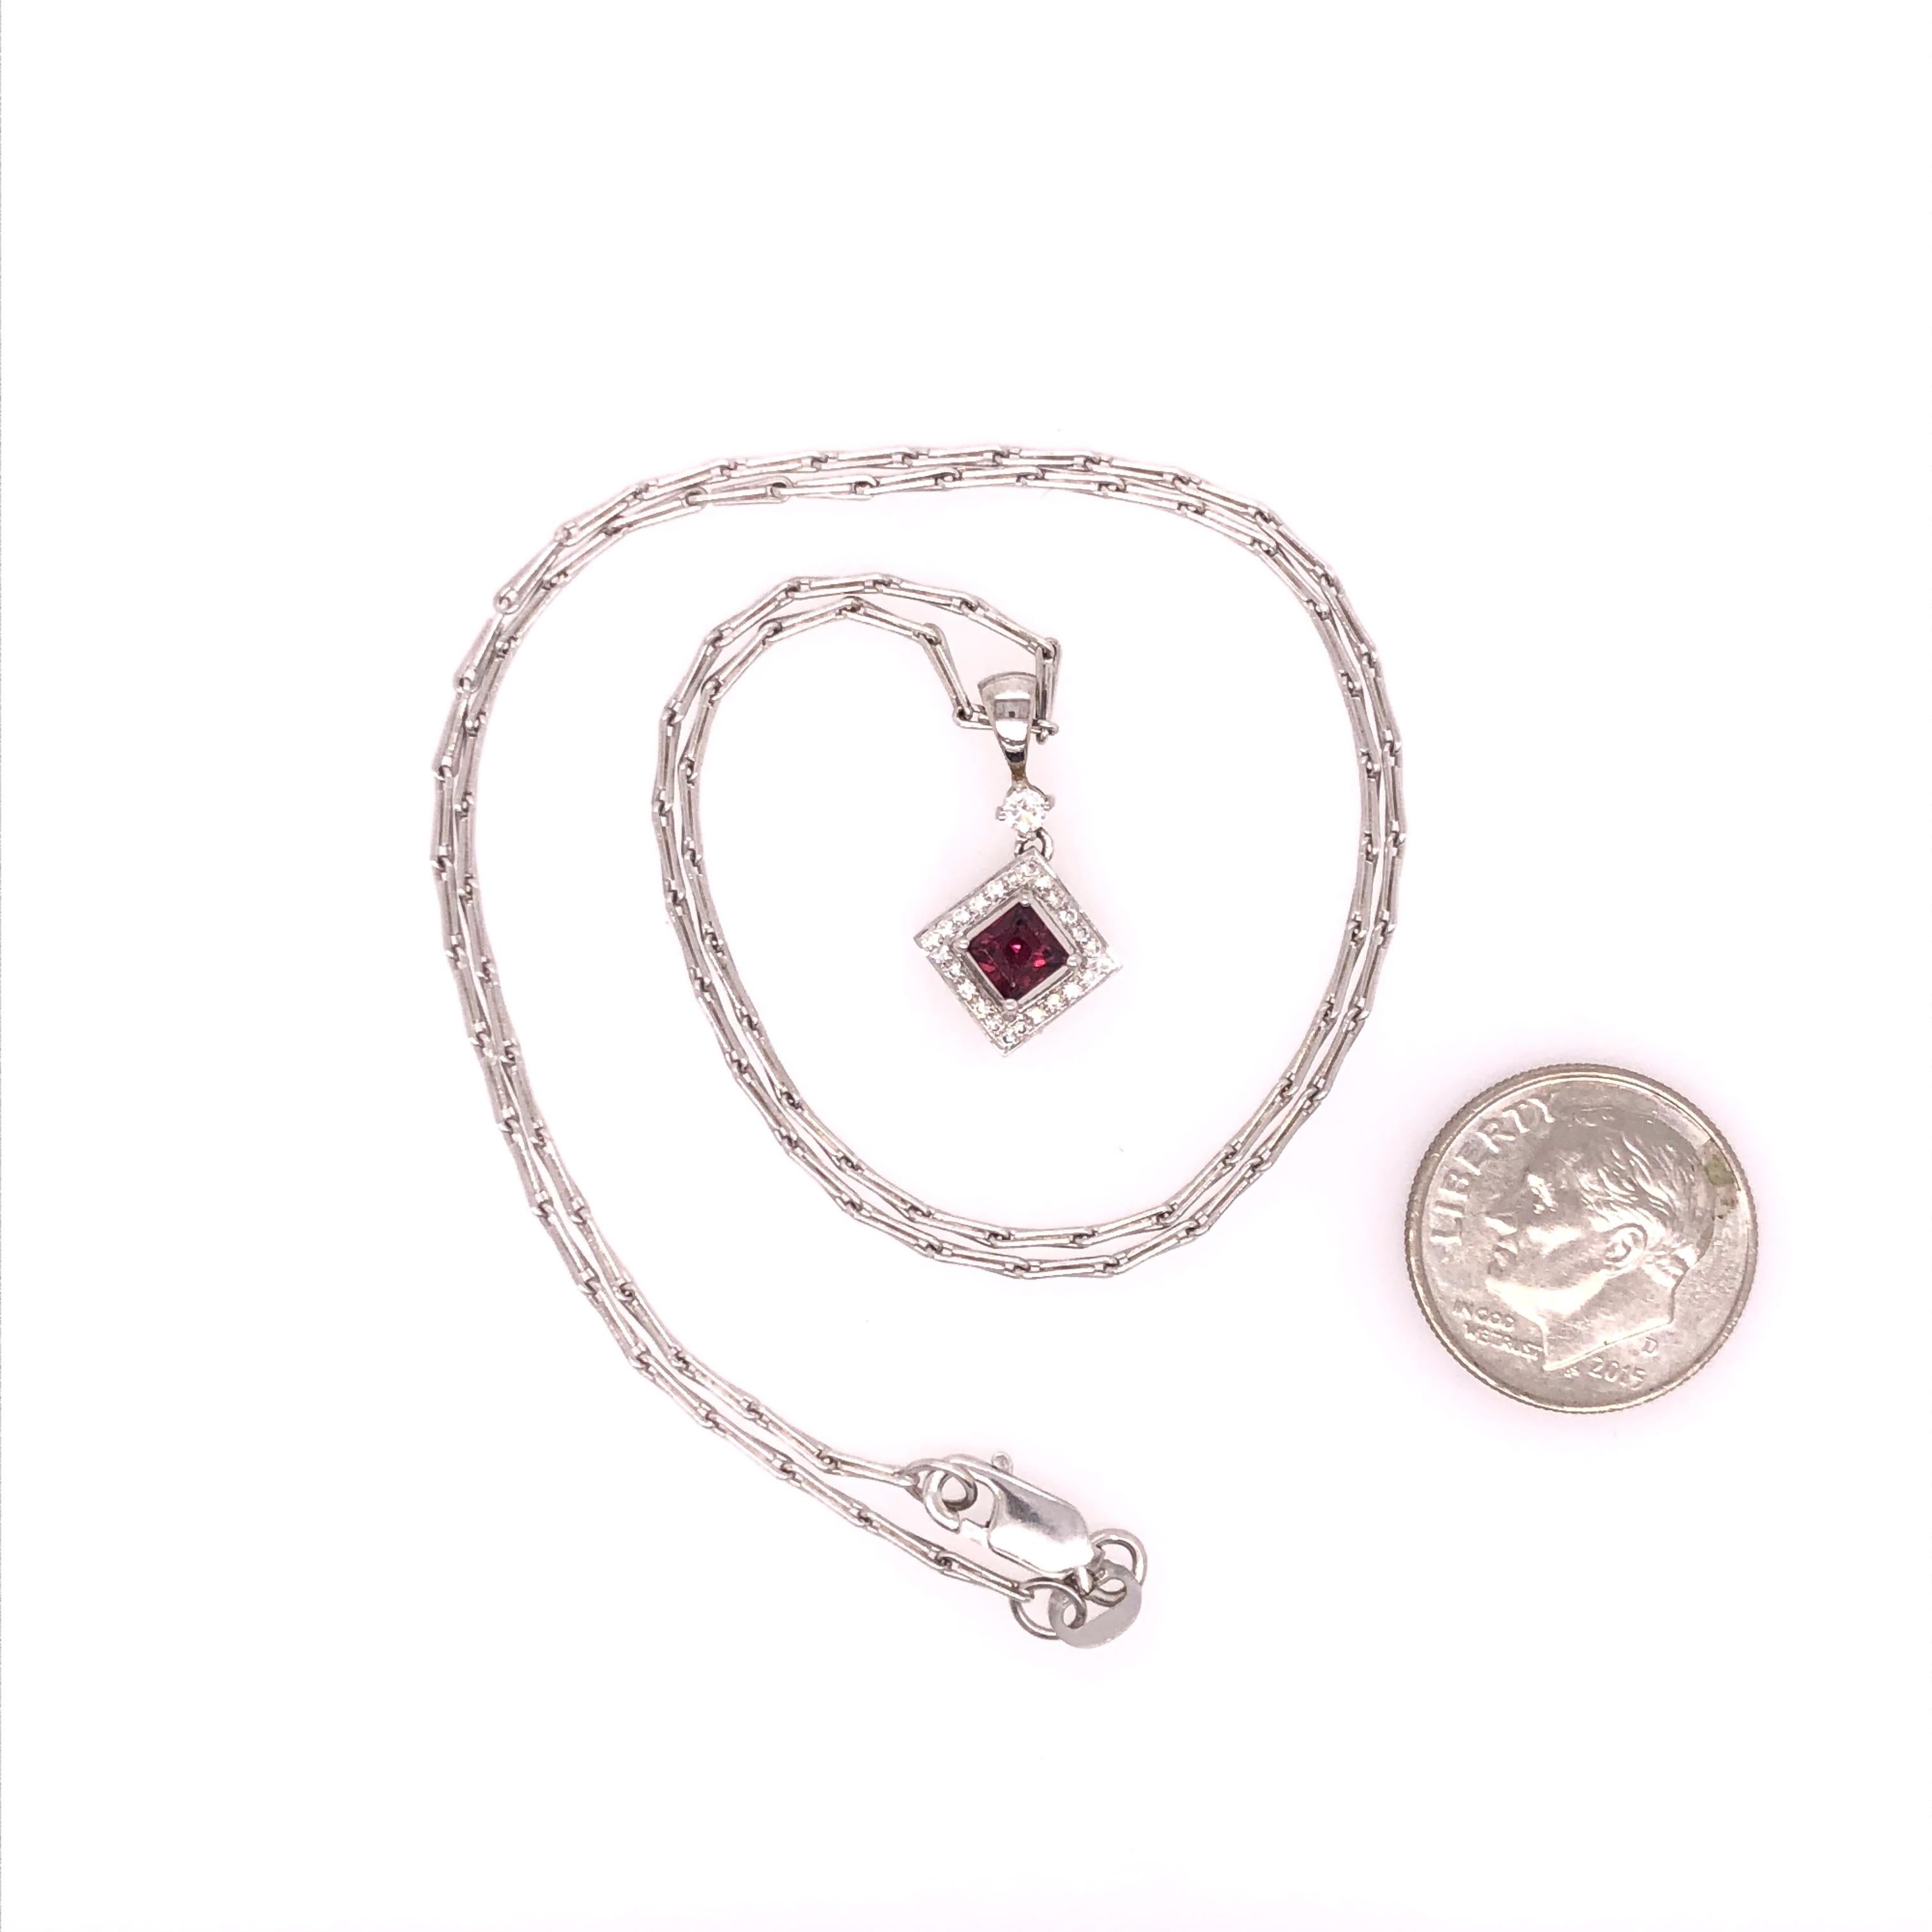 Princess Cut Pink Sapphire, Diamond, and White Gold Necklace 1